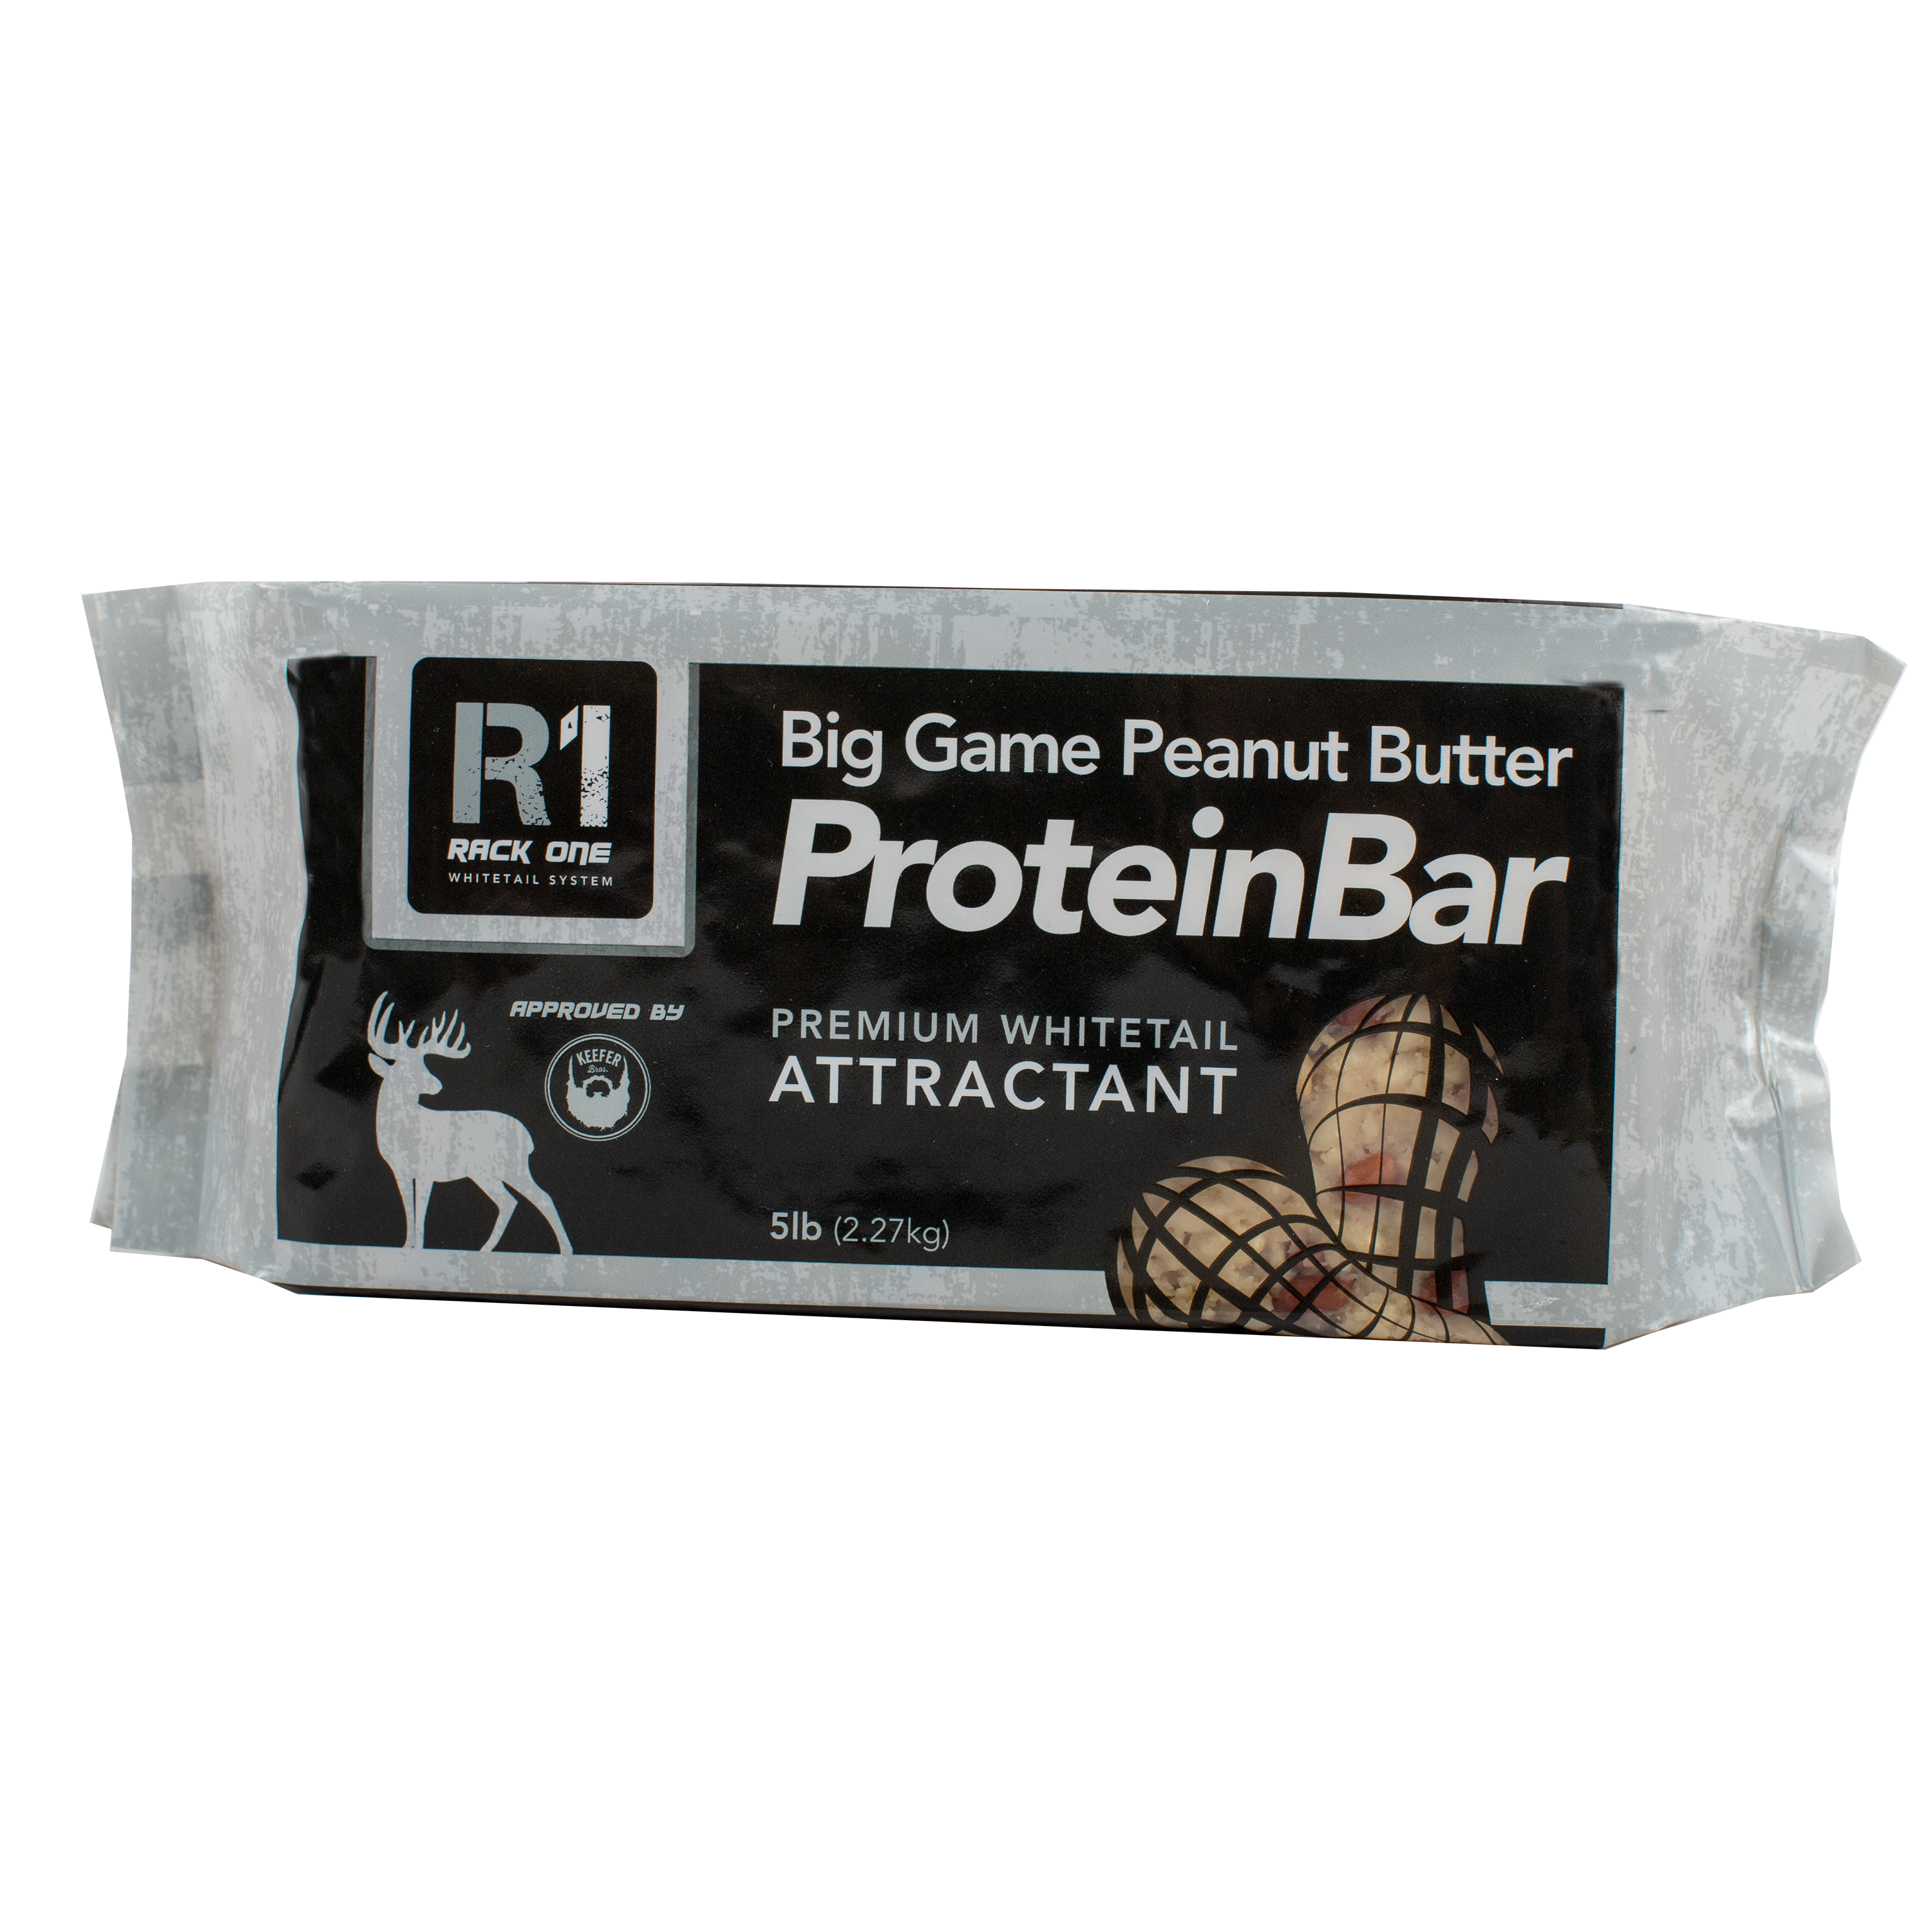 Rack One Expands Big Game Peanut Butter in 2019 